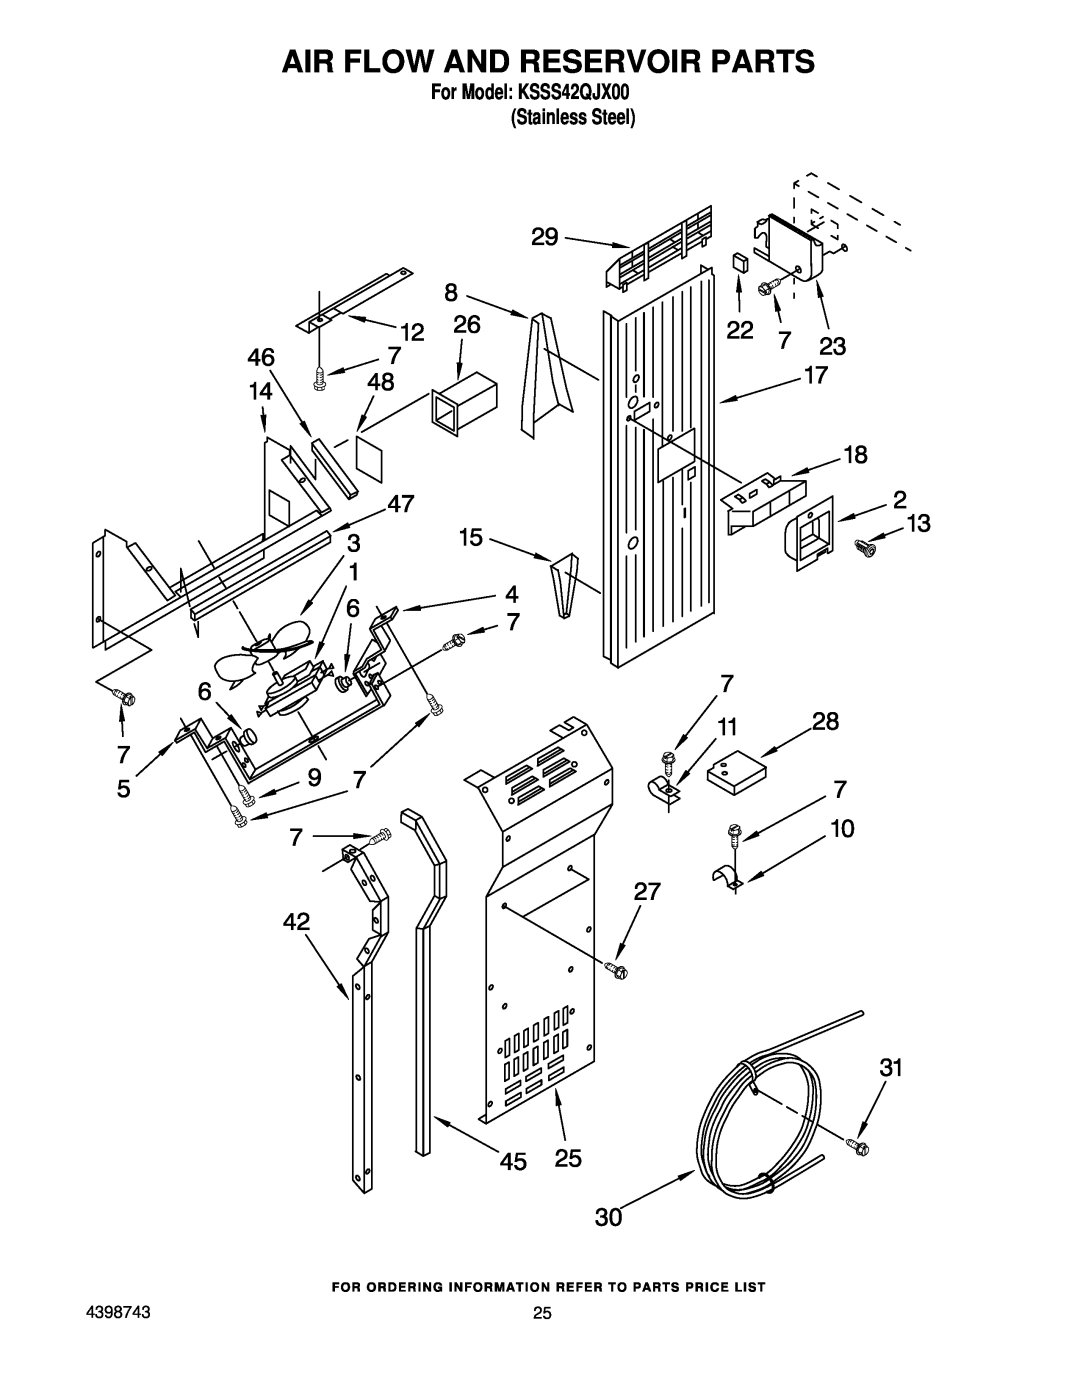 KitchenAid manual Air Flow And Reservoir Parts, For Model KSSS42QJX00 Stainless Steel 